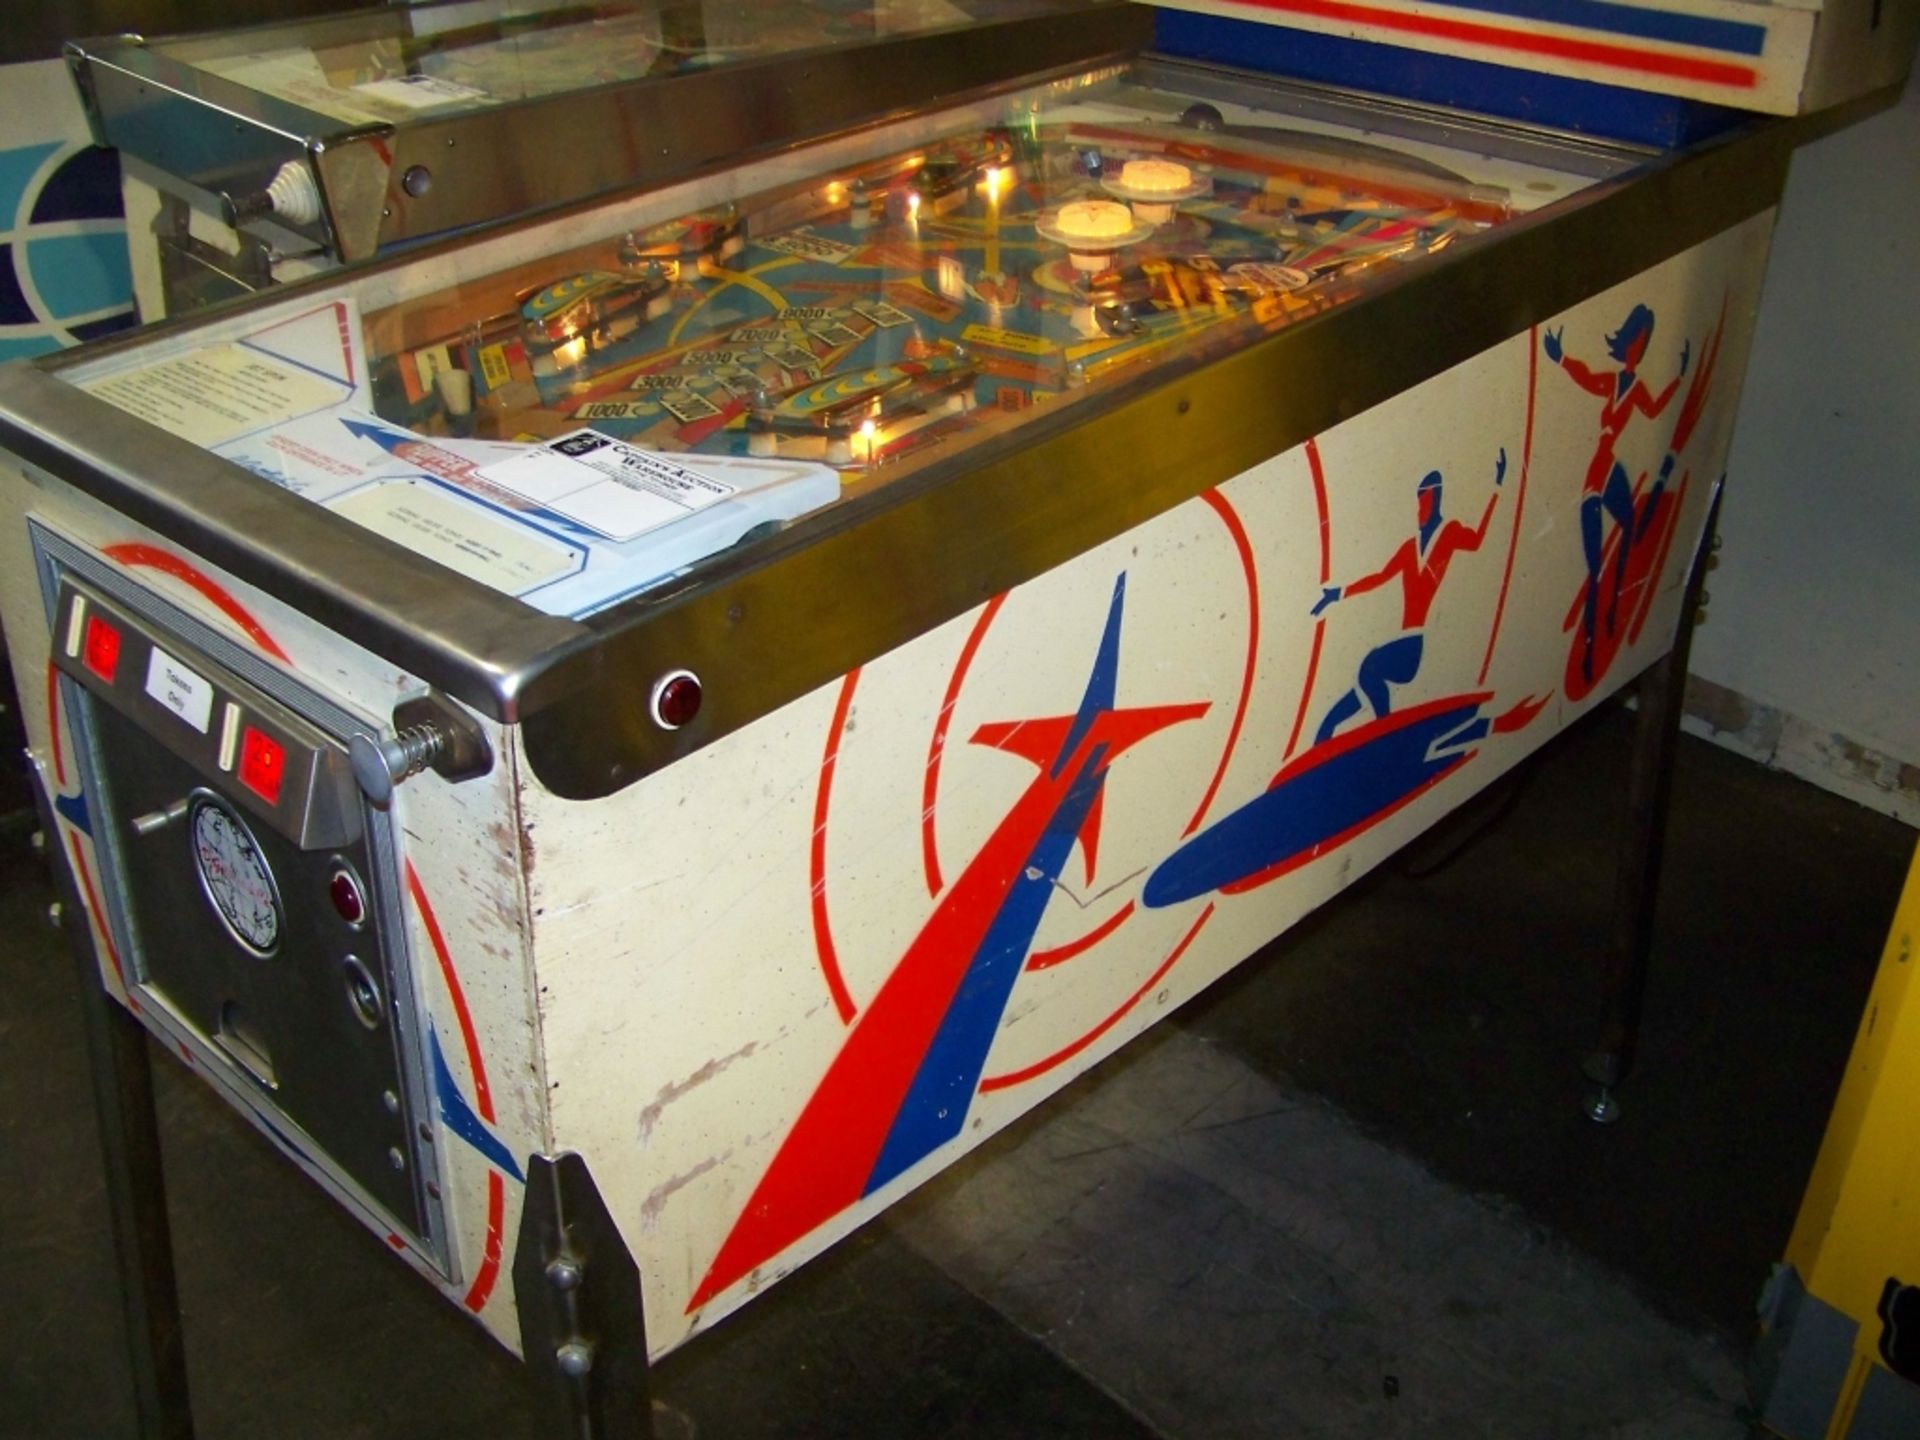 JET SPIN PINBALL MACHINE GOTTLIEB 1977 Item is in used condition. Evidence of wear and commercial - Image 7 of 8